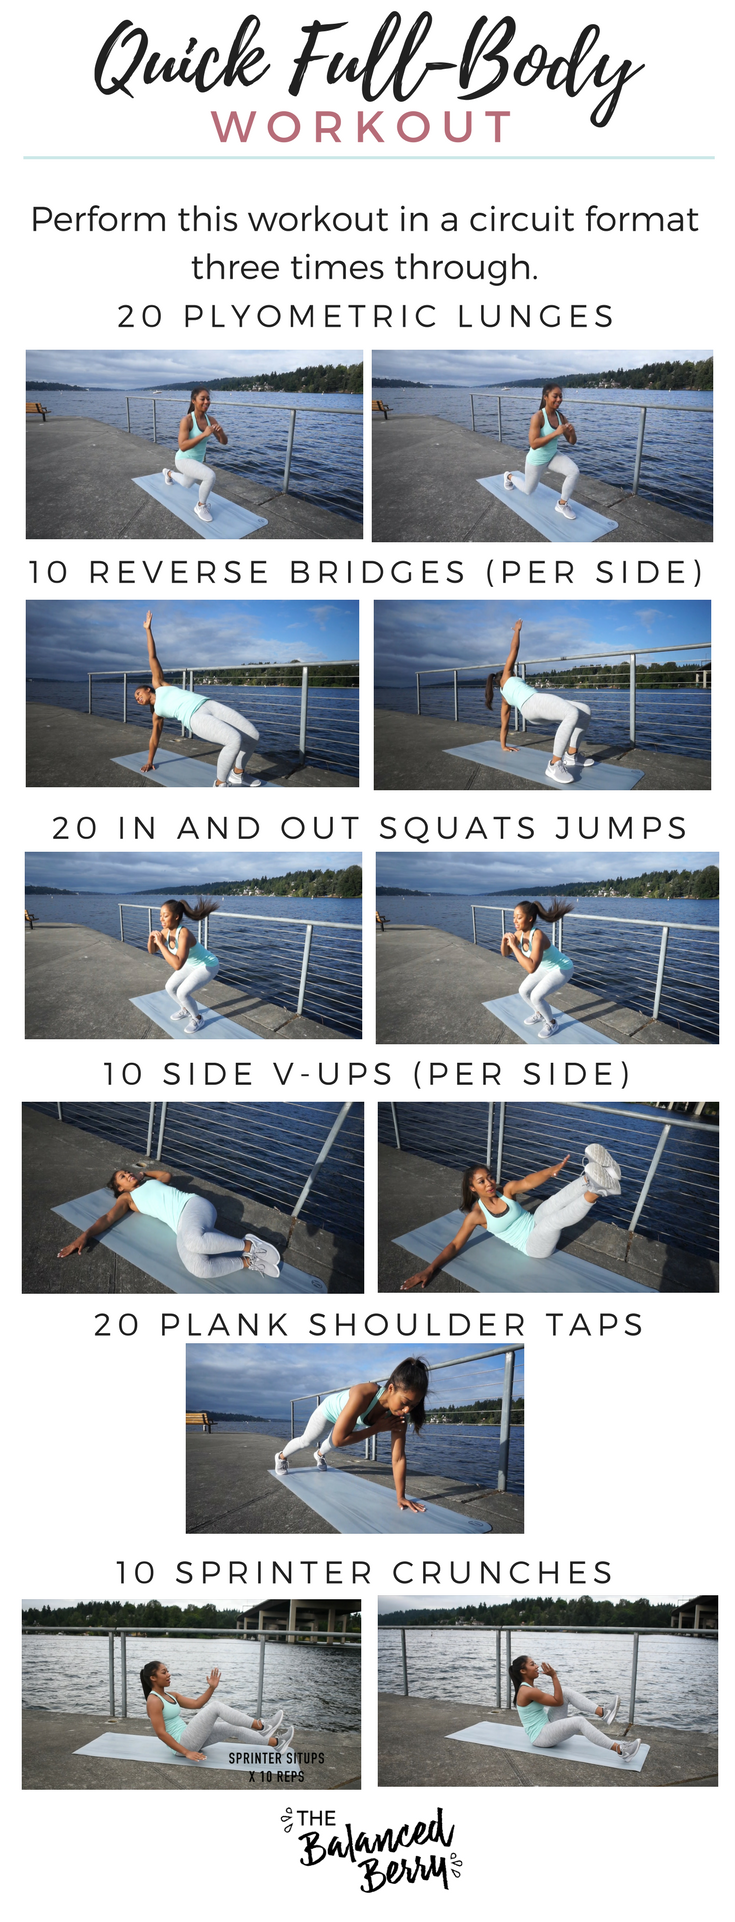 This full body workout will work you from head to toe. No equipment needed!